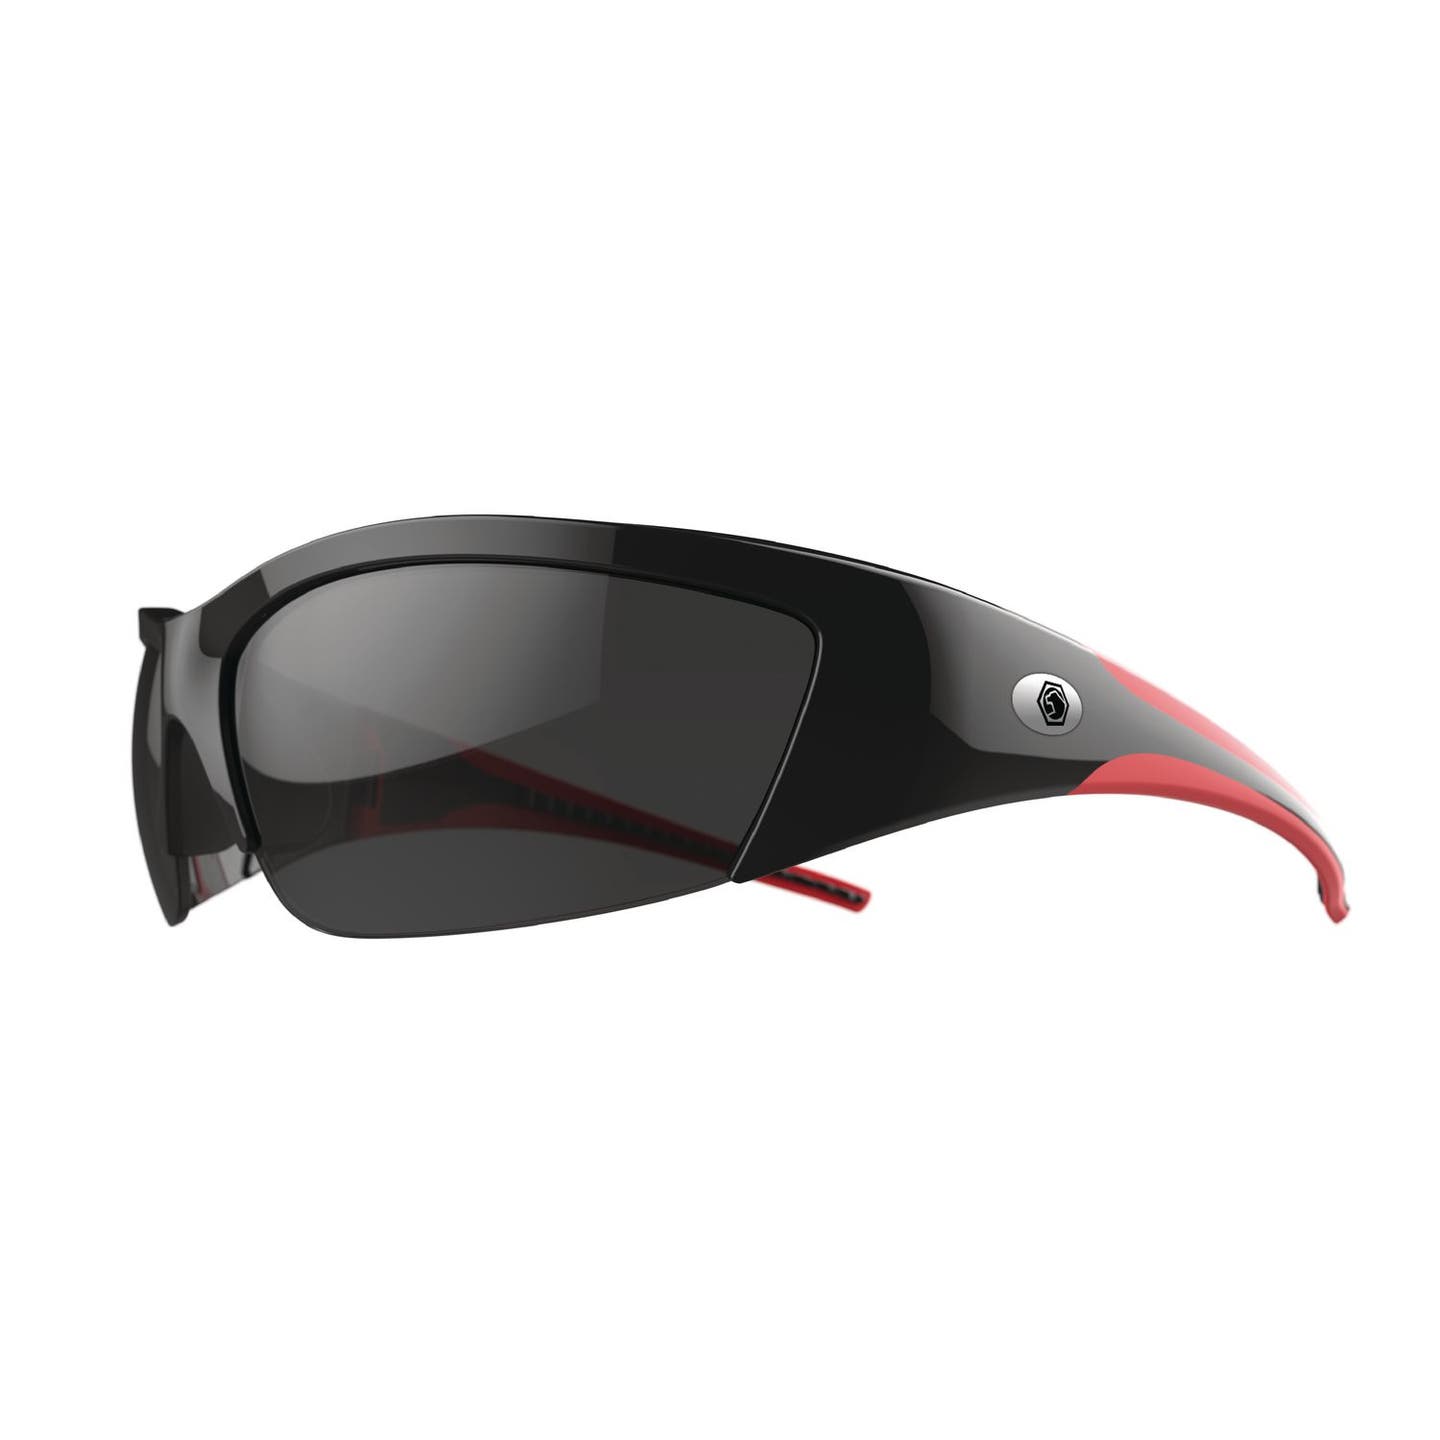 FORCEFLEX SAFETY GLASSES BLACK AND RED HALF FRAME WITH ANTI-FOG SMOKE LENSES